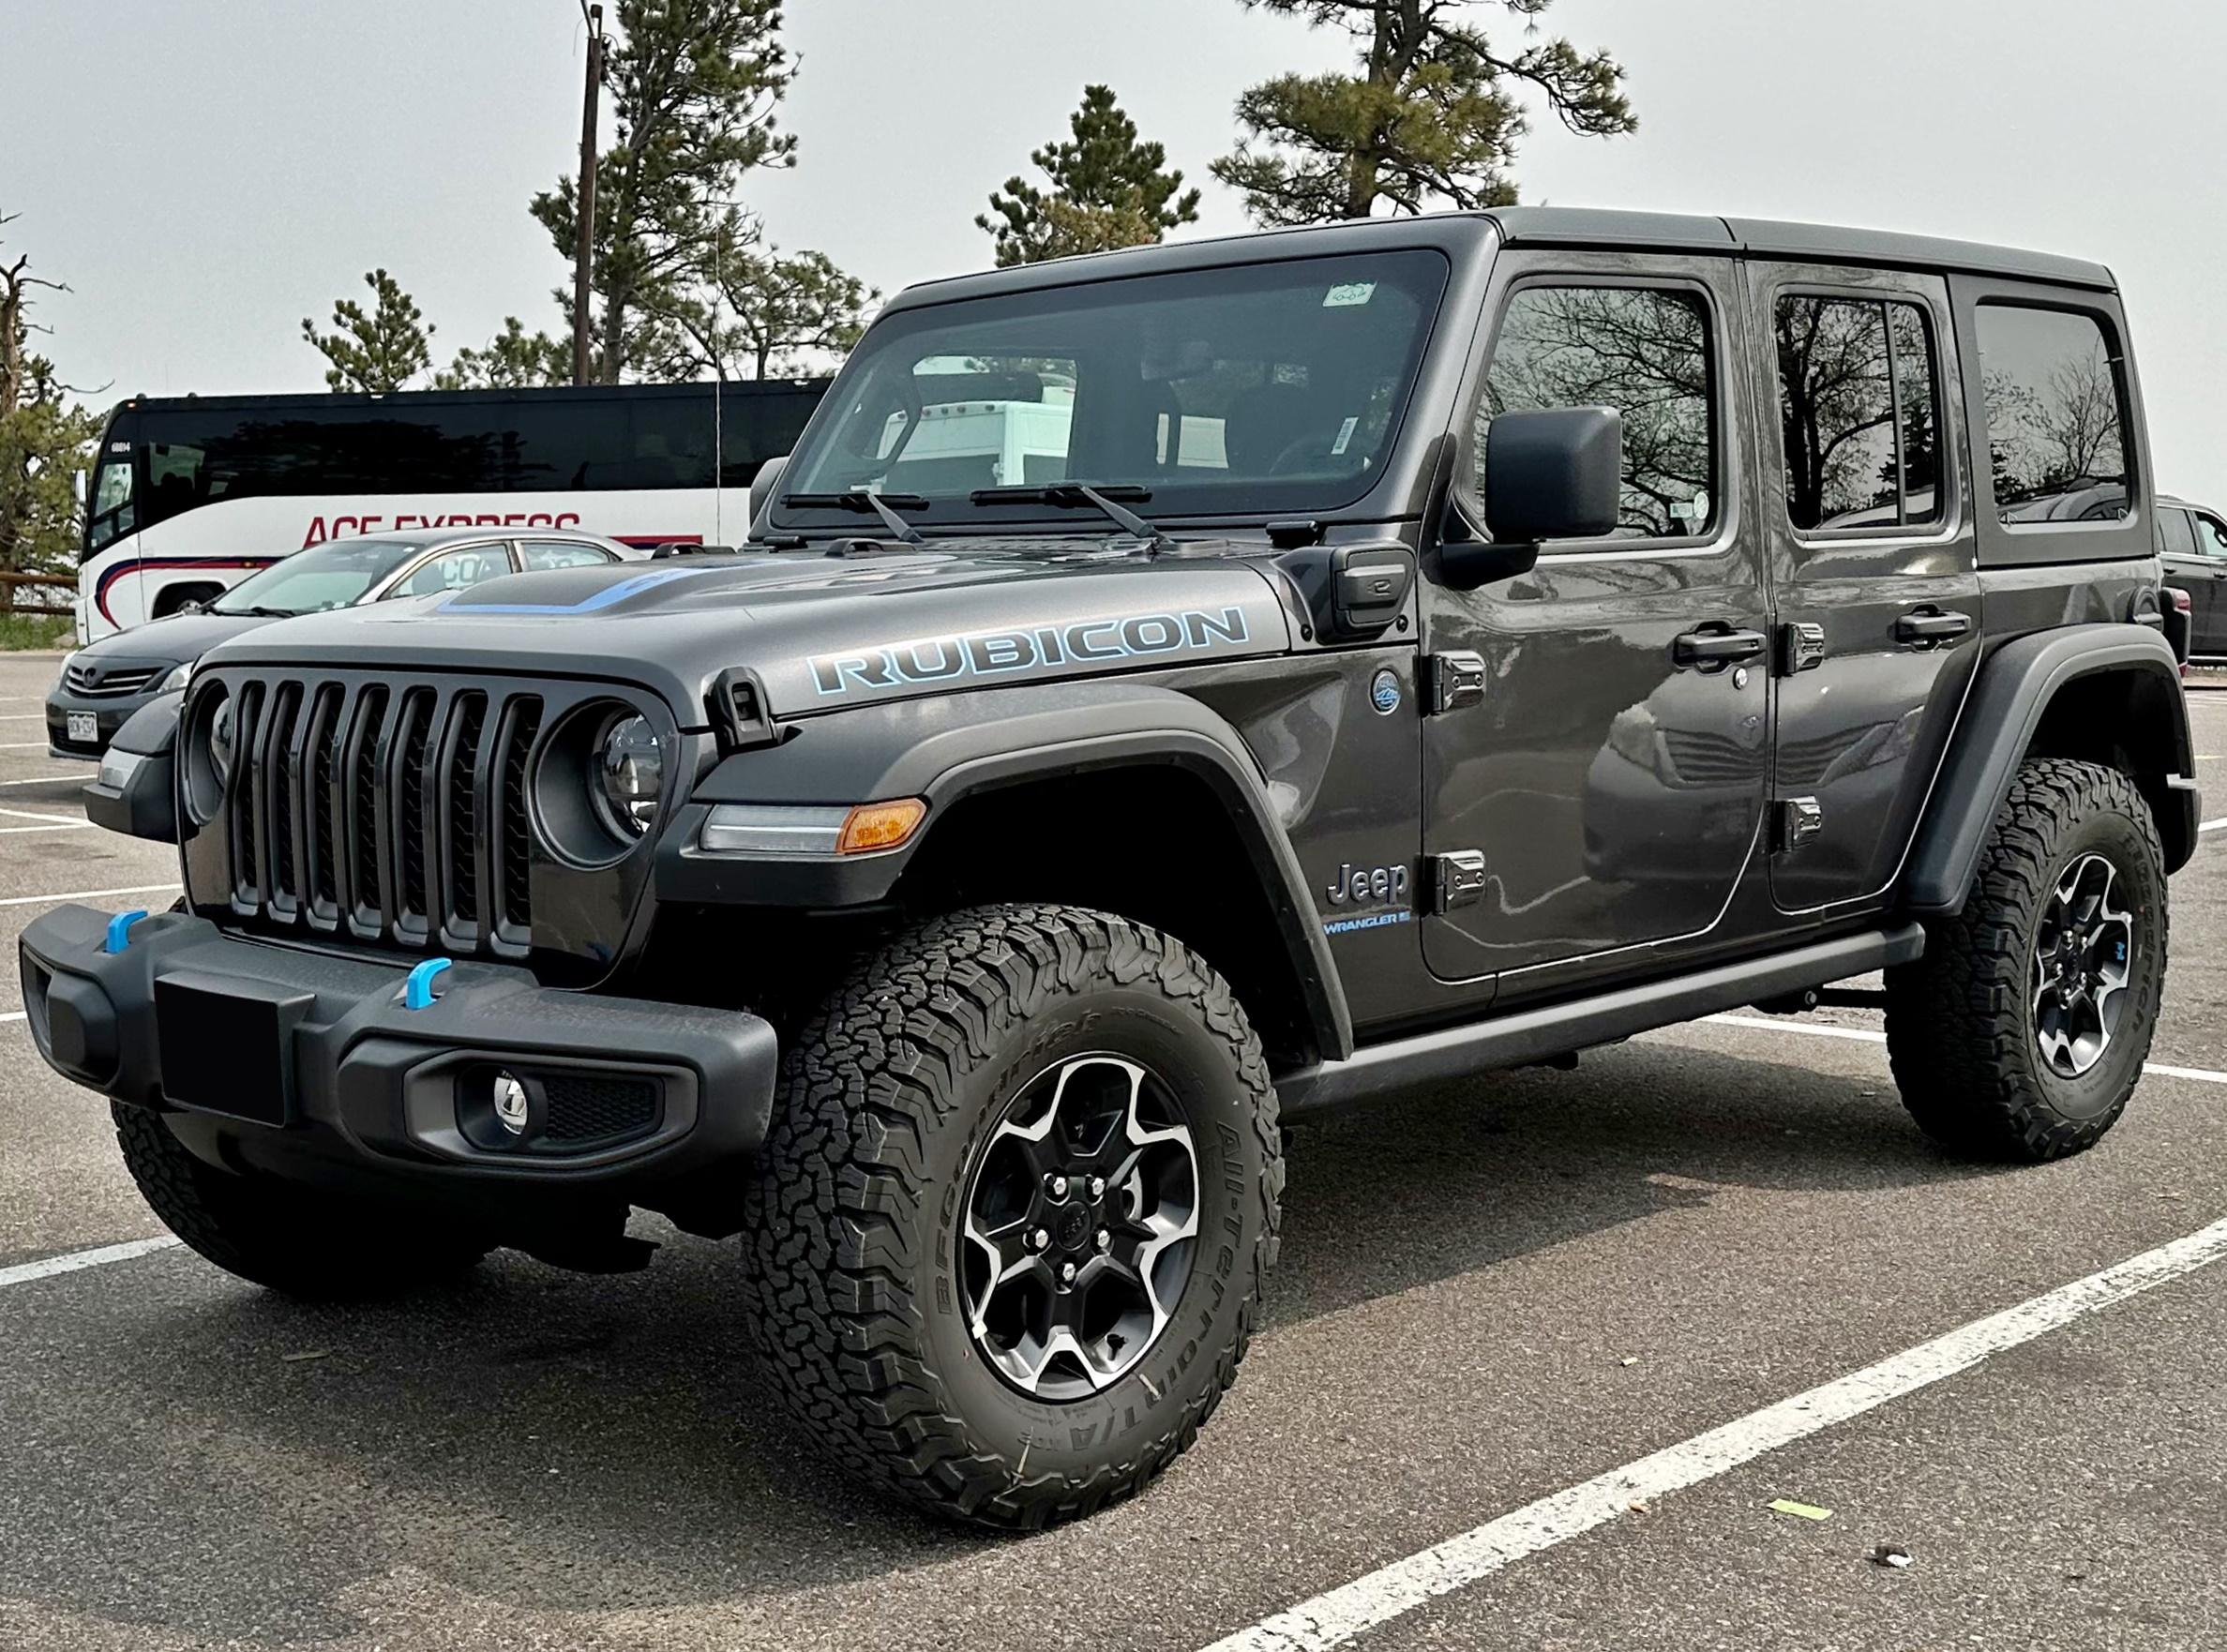 Tips for​ preserving and displaying your Jeeps window sticker